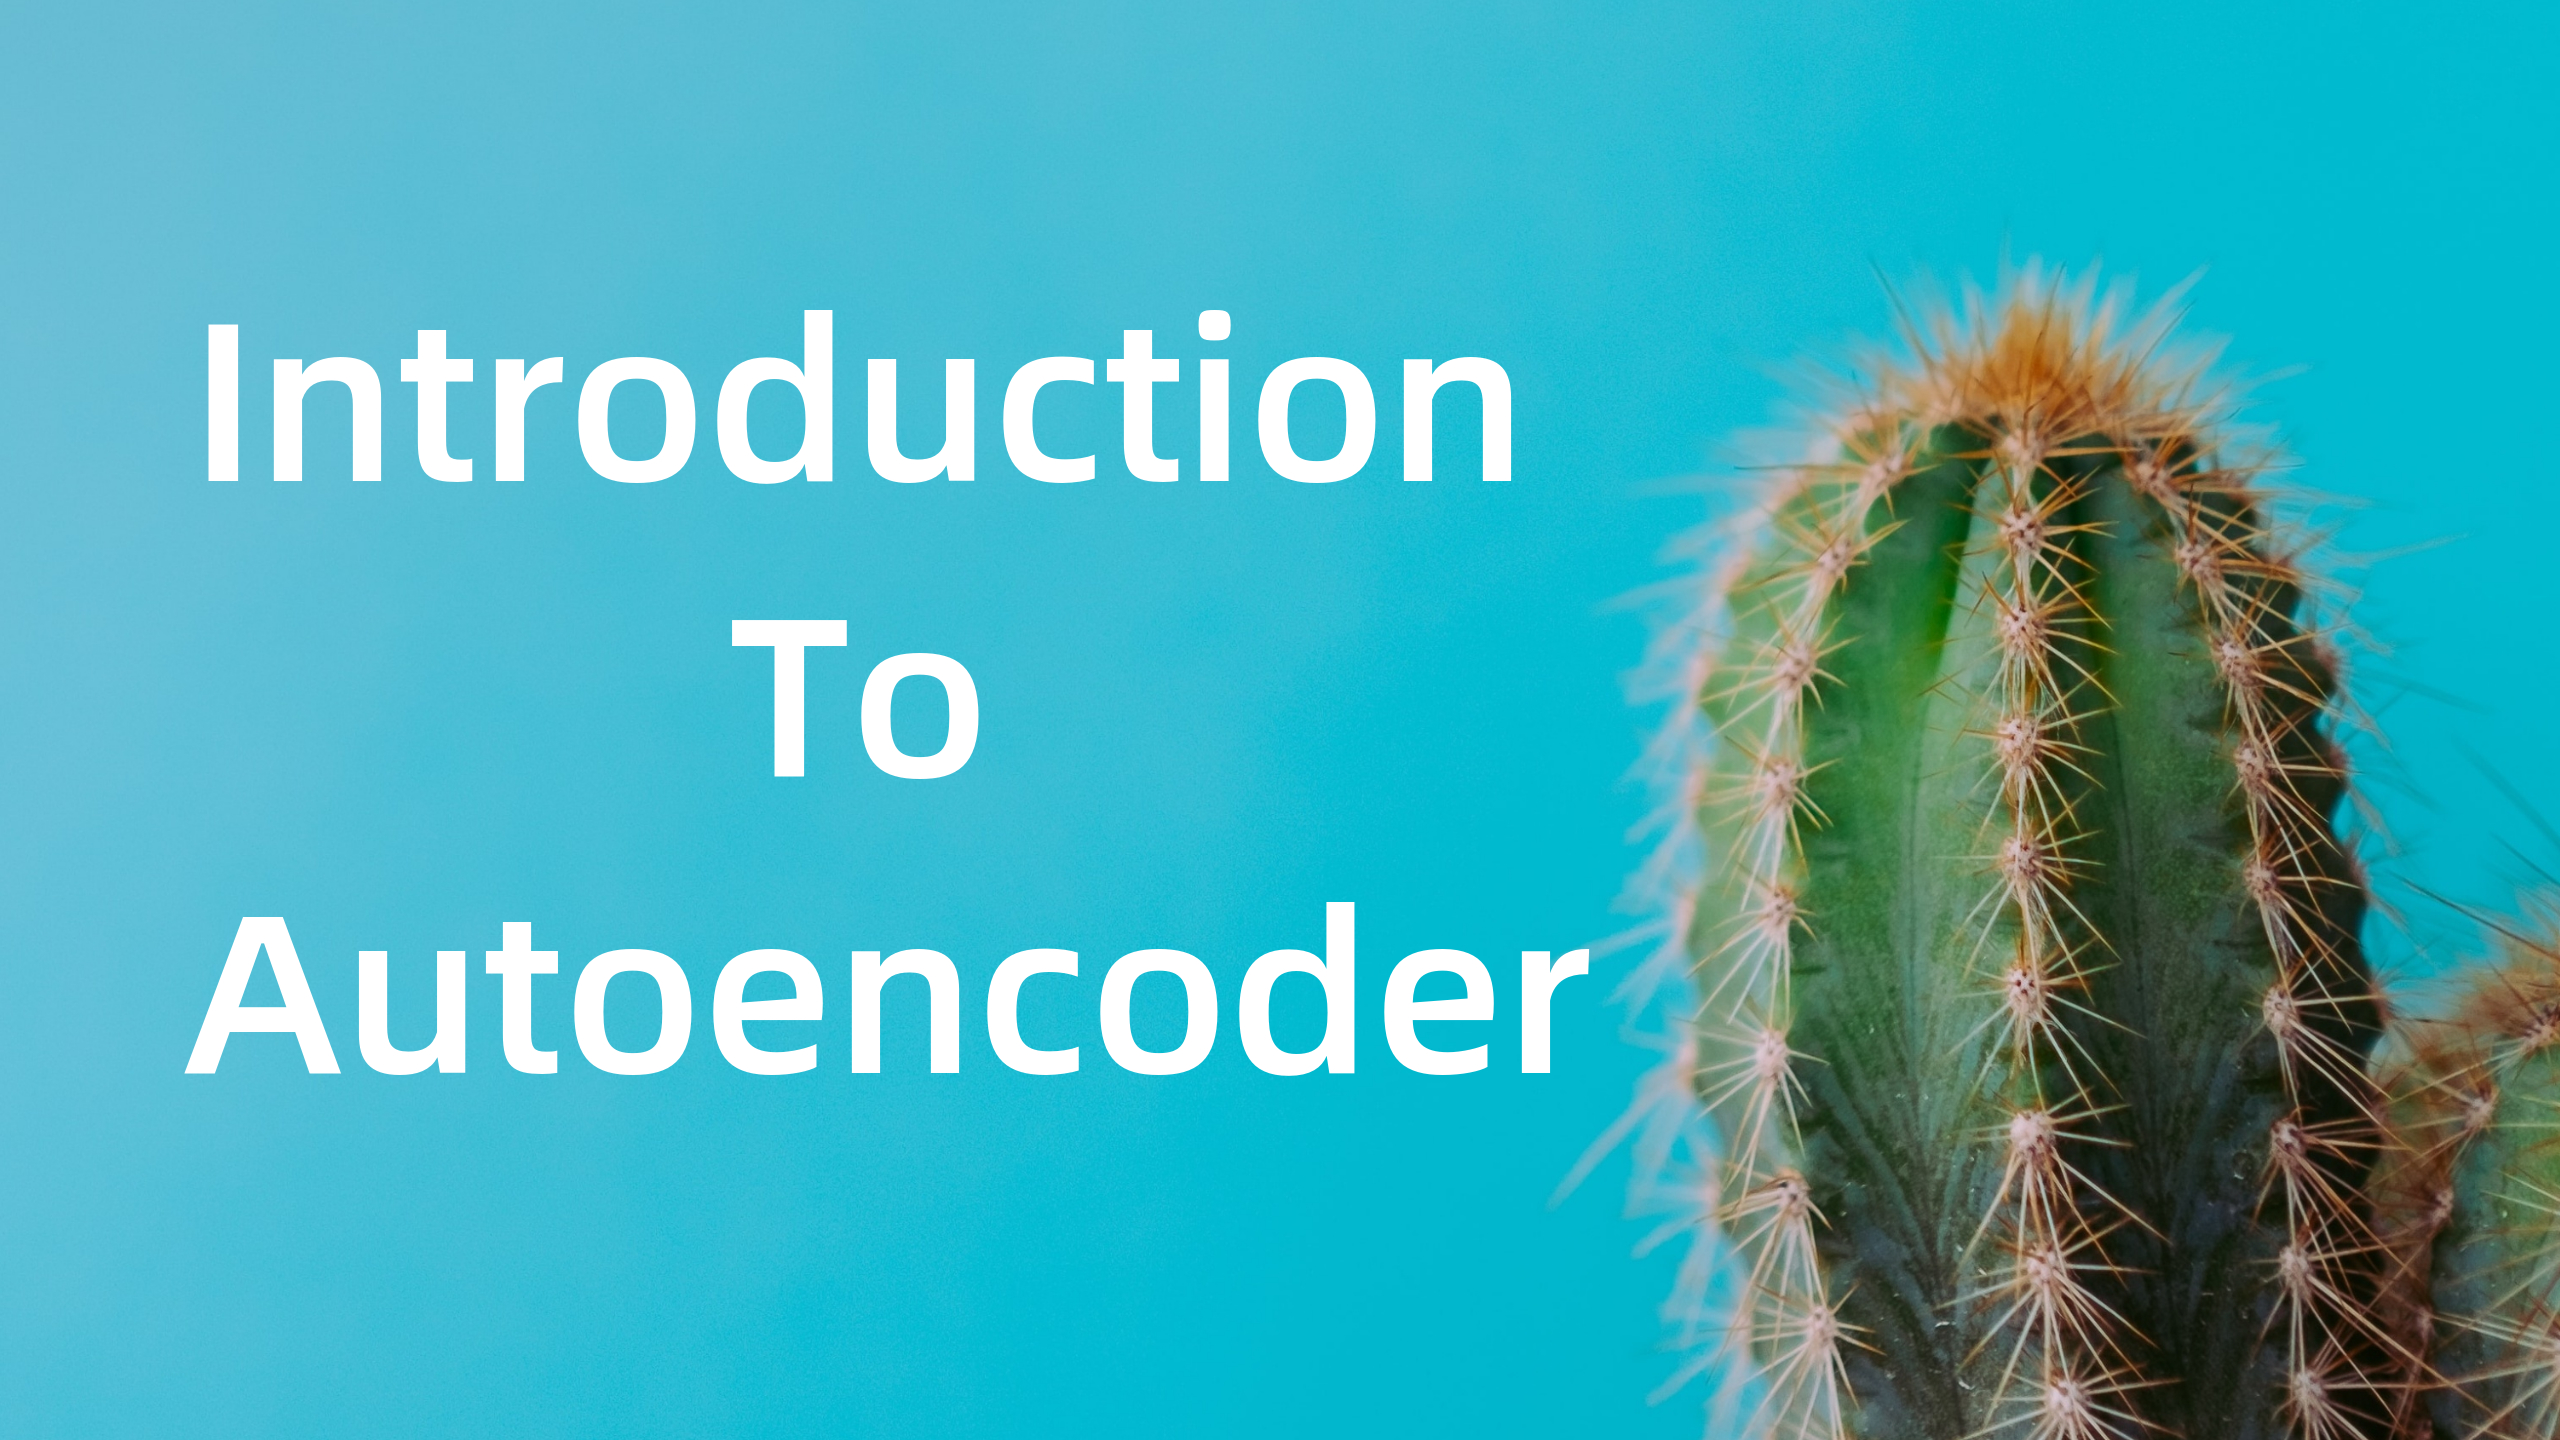 Introduction to autoencoder